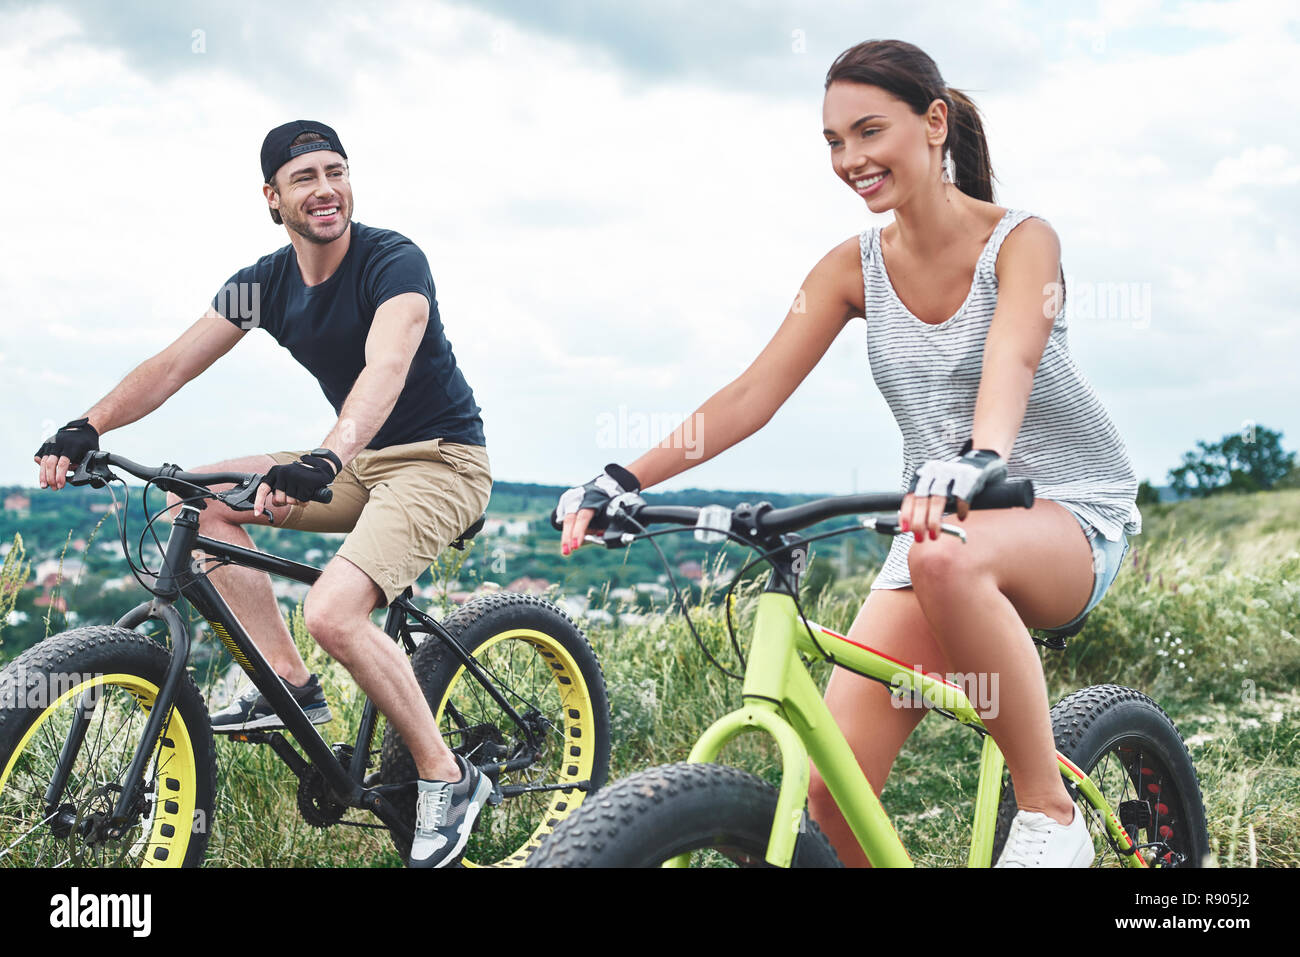 A man and a woman are laughing and riding fatbikes. Close up Stock Photo